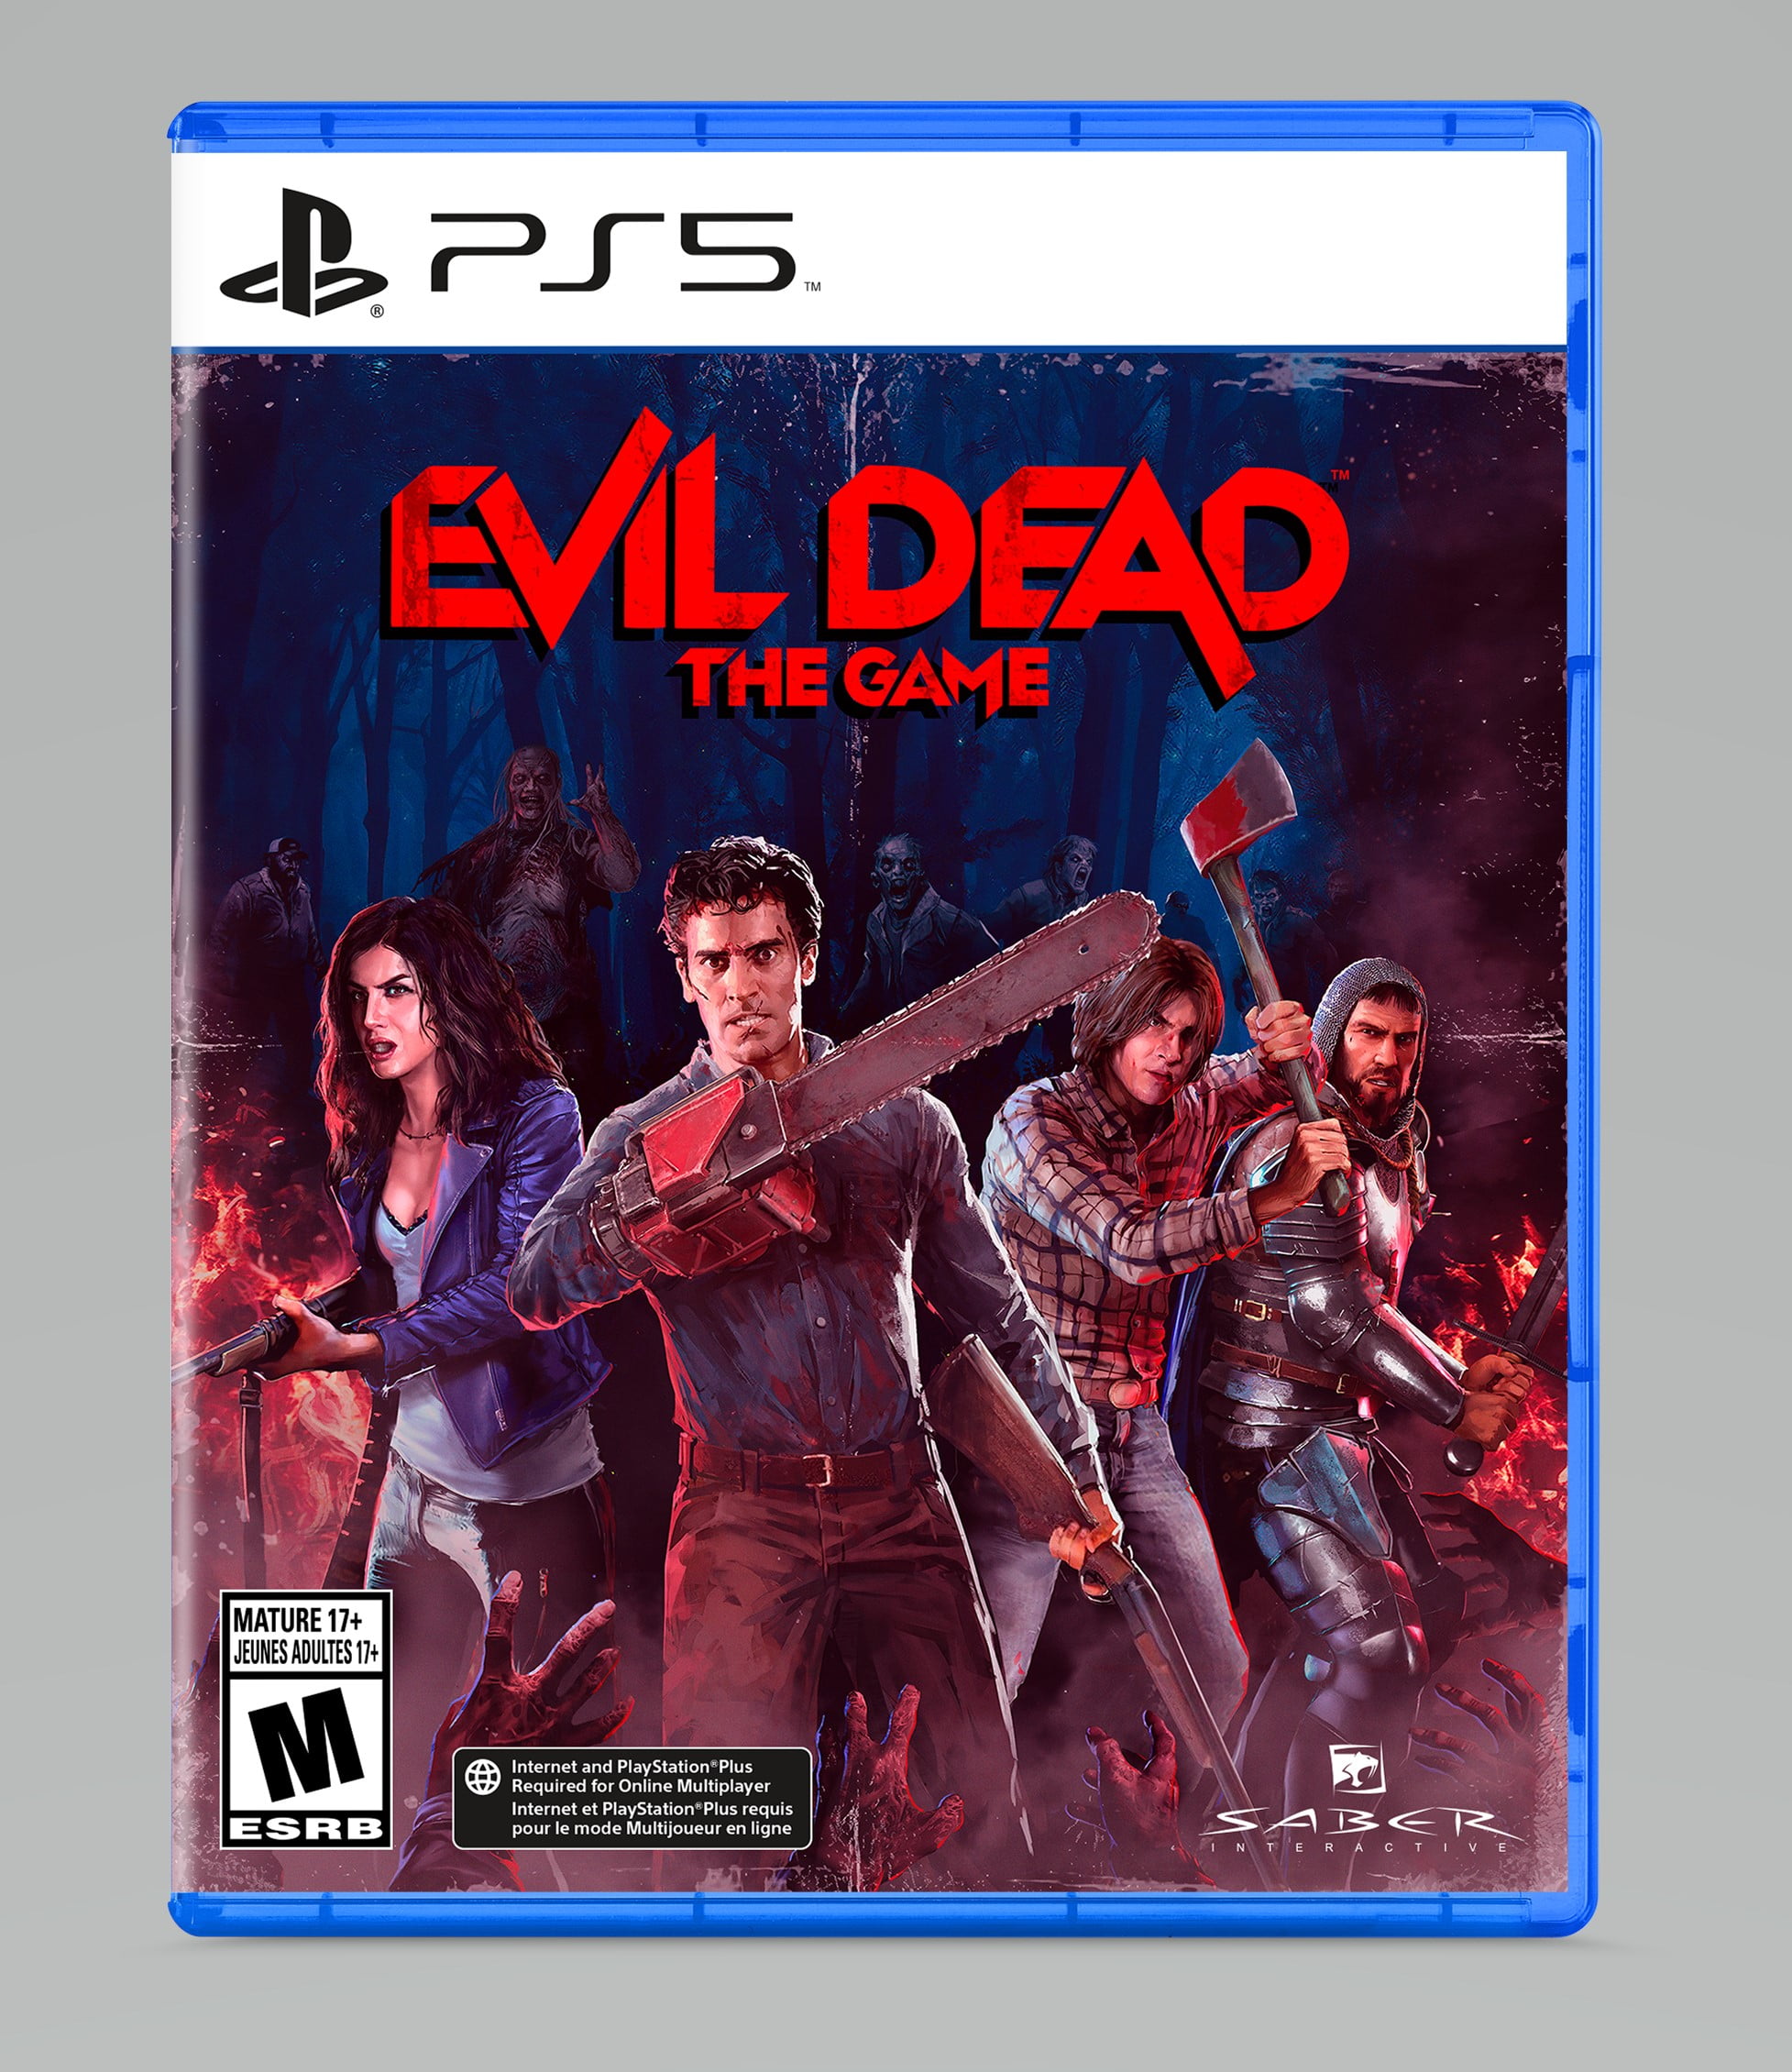 Evil Dead: The Game Unleashes a New Trailer For GOTY Edition